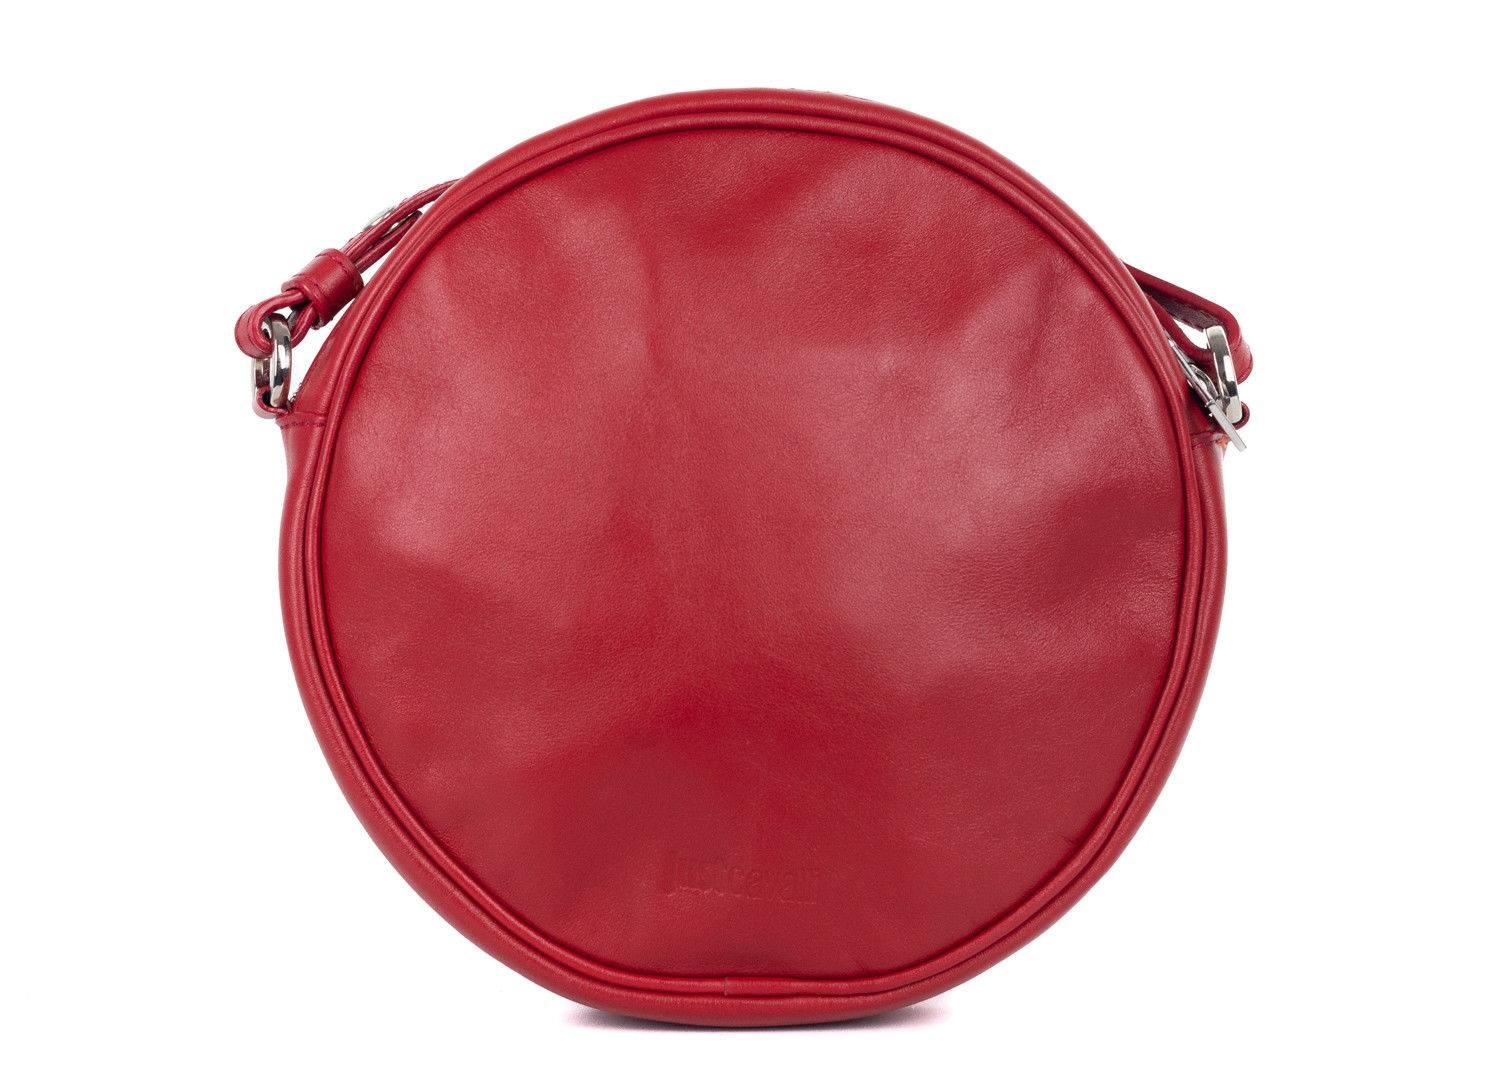 Just Cavalli red leather round crossbody bag. This crossbody bag features a popcorn image in front with metallic cold accents on the bucket. This is a fun and popping bag for a fun style and a pop in color. Style it with a cute fit and flare dress